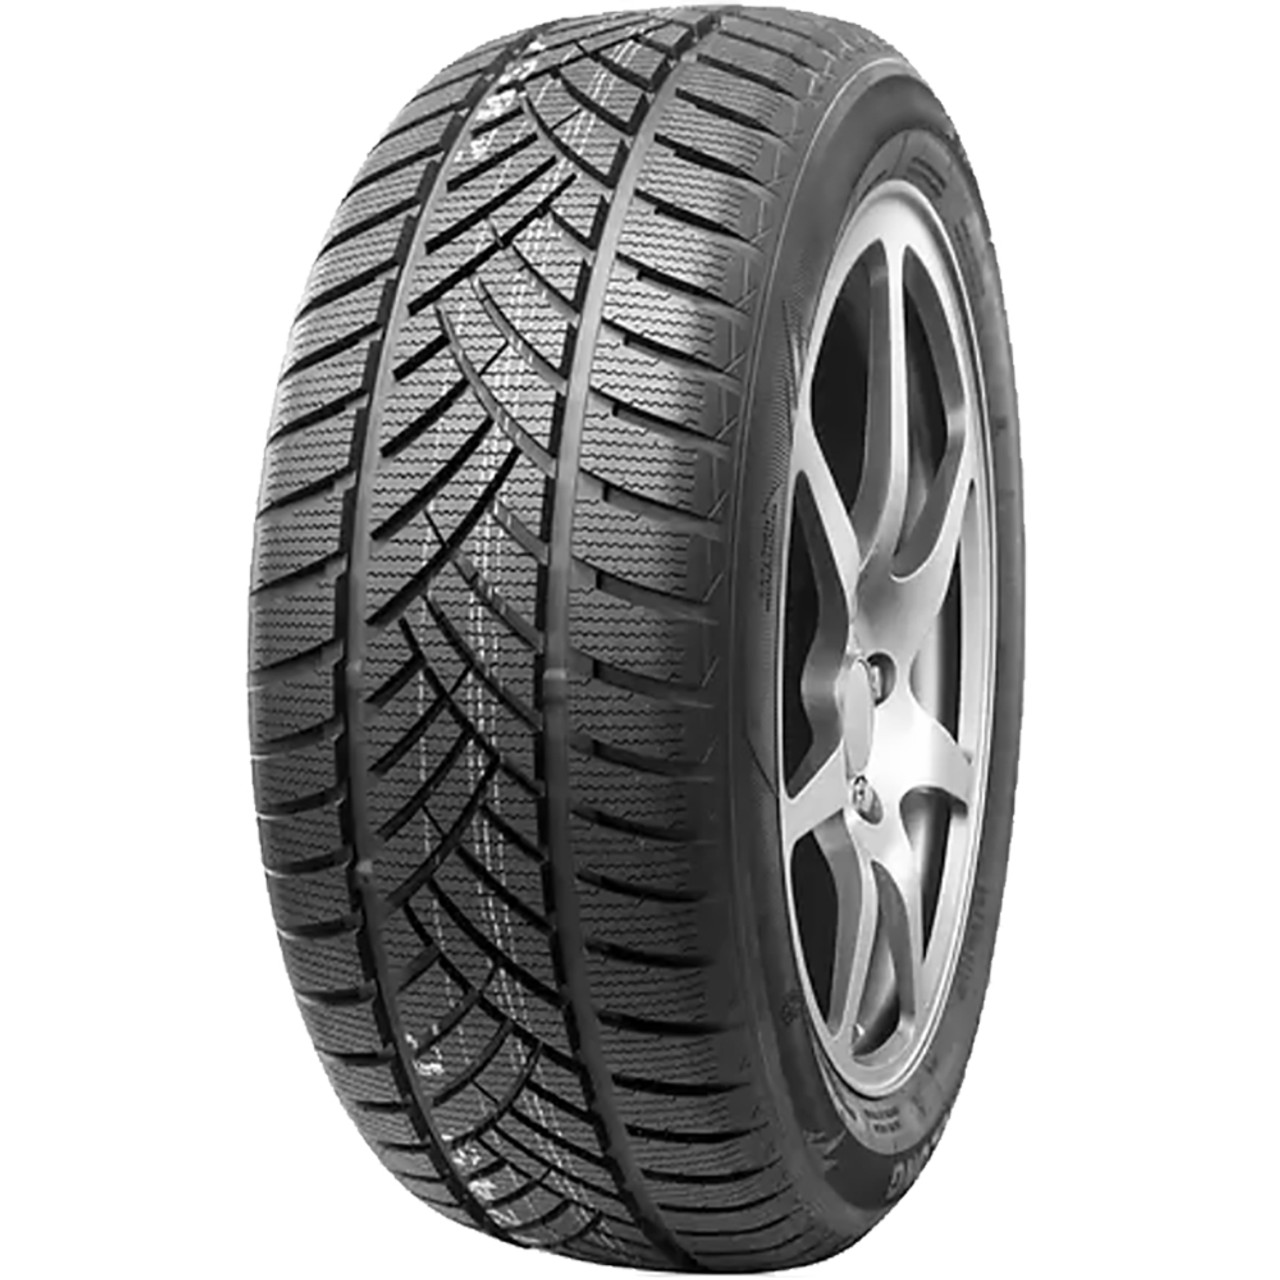 Gomme Nuove Leao 175/70 R14 84T WINT.DEFENDER HP M+S pneumatici nuovi Invernale